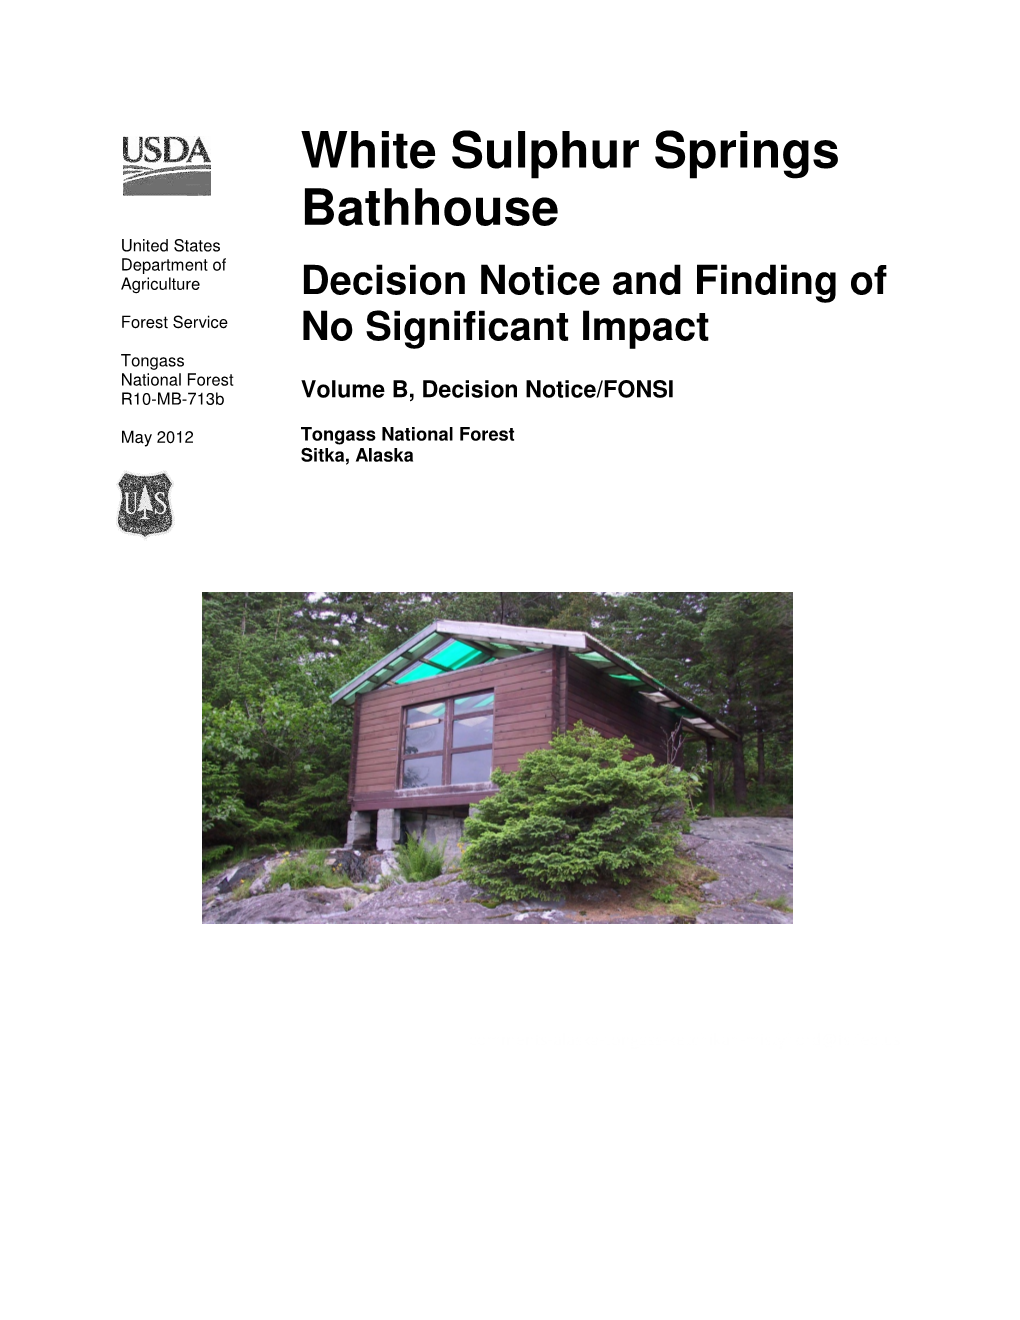 White Sulphur Springs Bathhouse - Key Acronyms and Other Terms